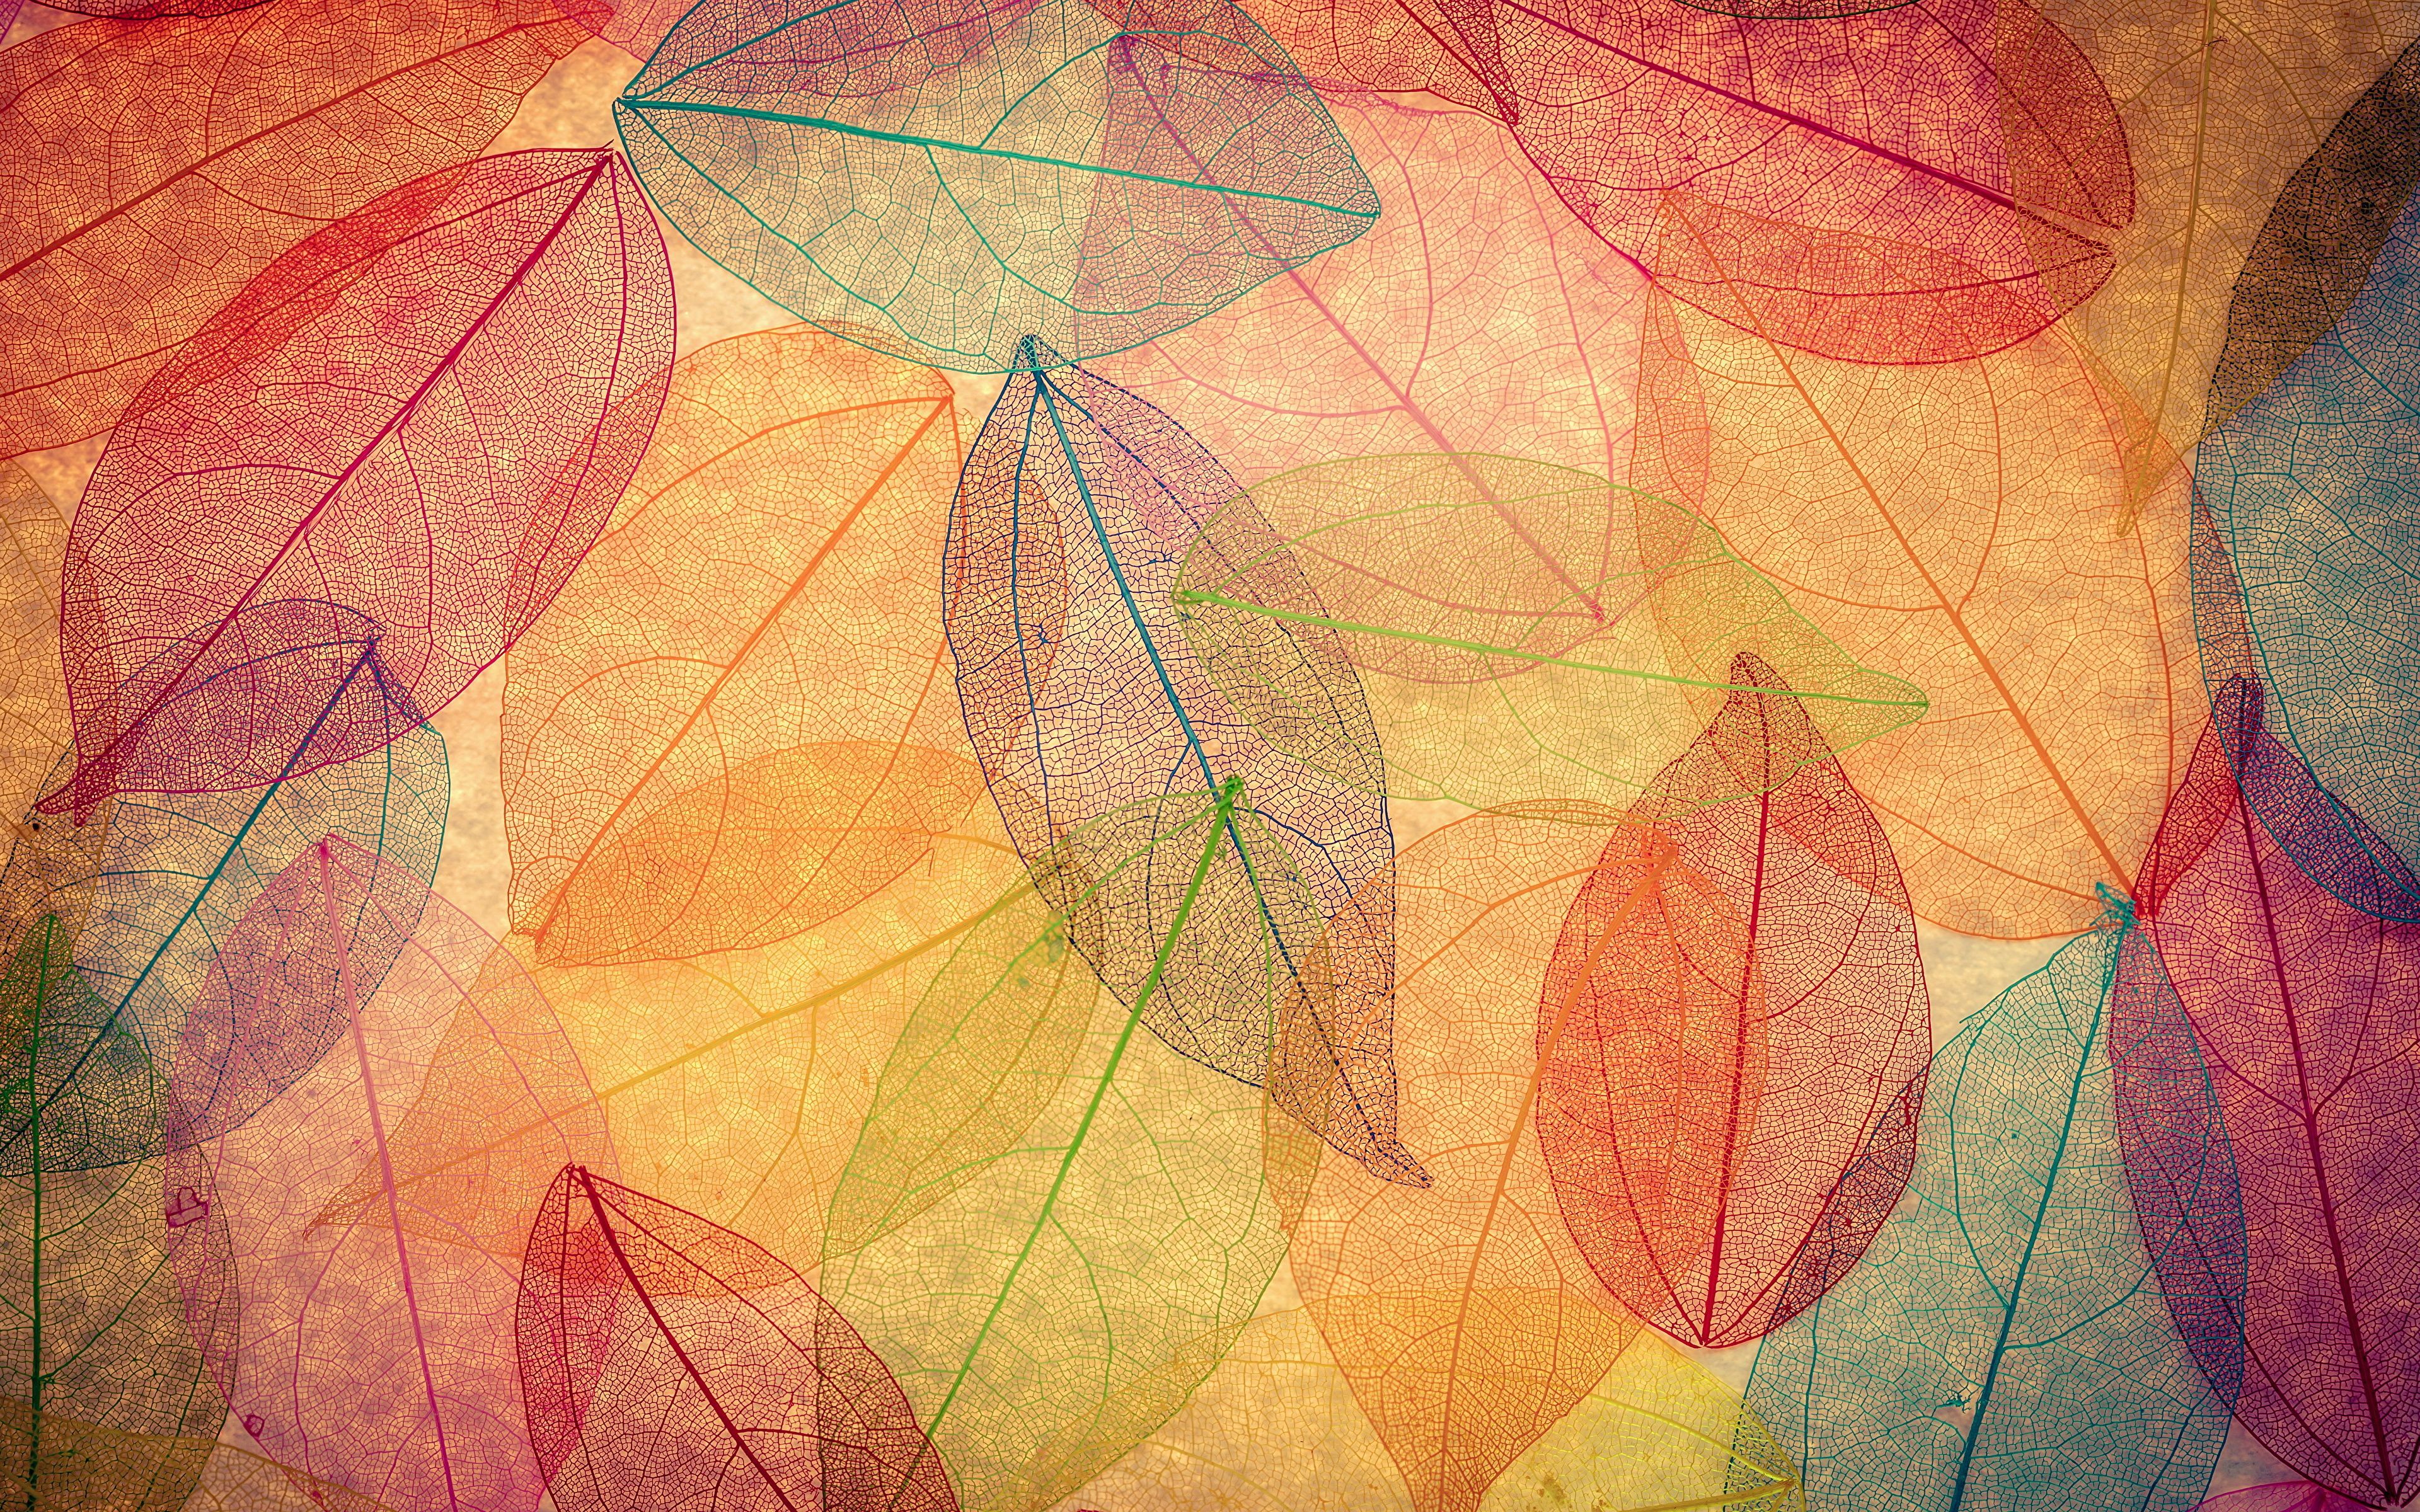 Abstract Autumn Wallpapers - Wallpaper Cave